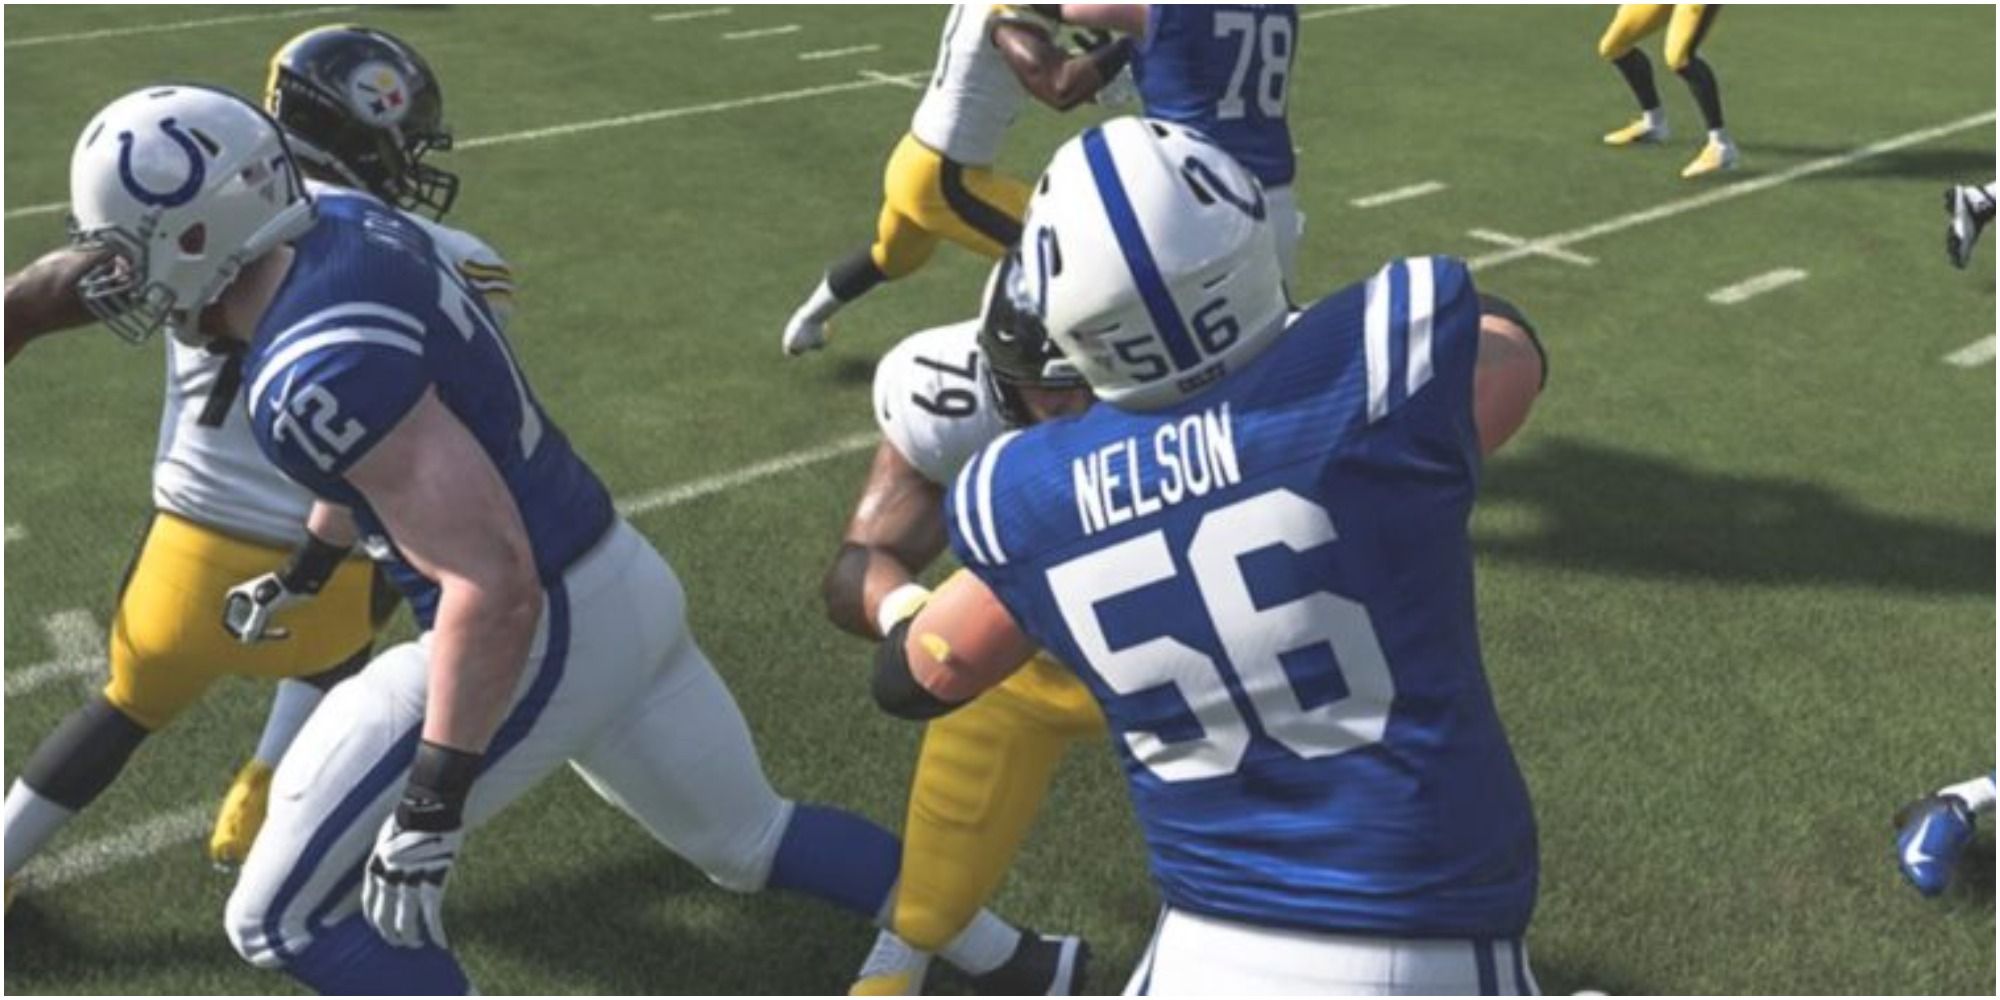 Madden NFL 22 Quenton Nelson Making A Block Against The Steelers